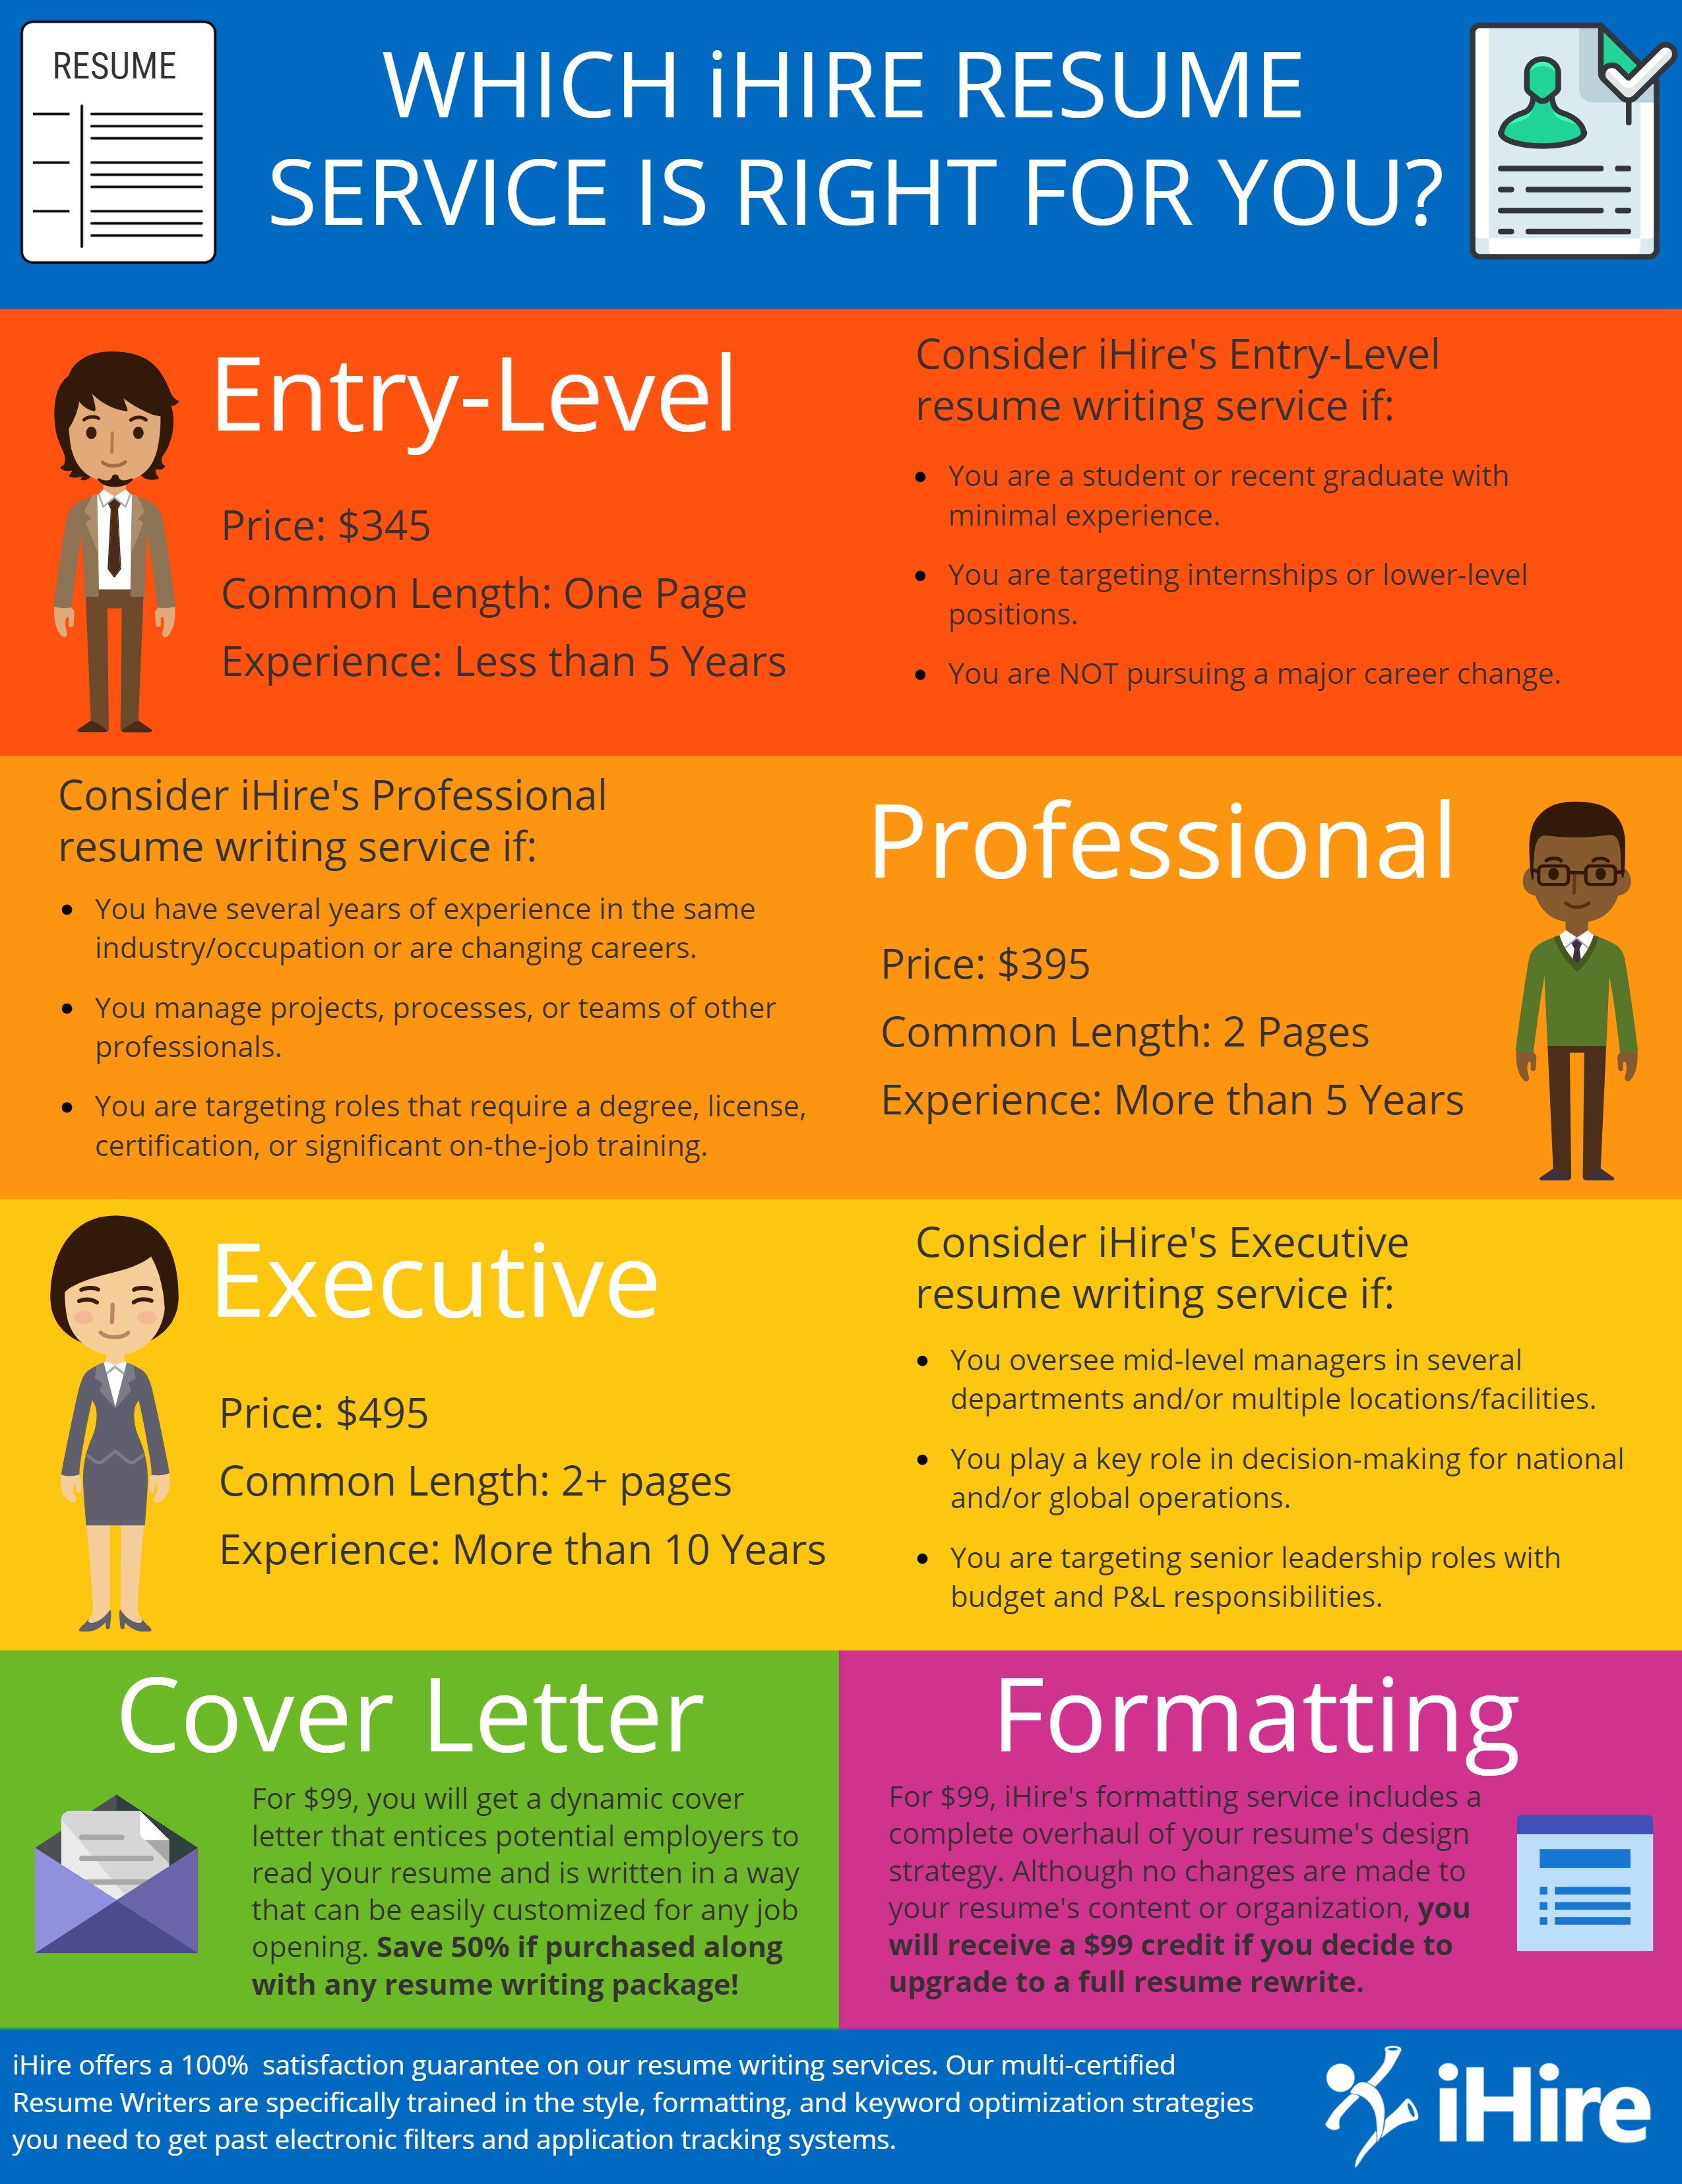 Resume writing services for healthcare